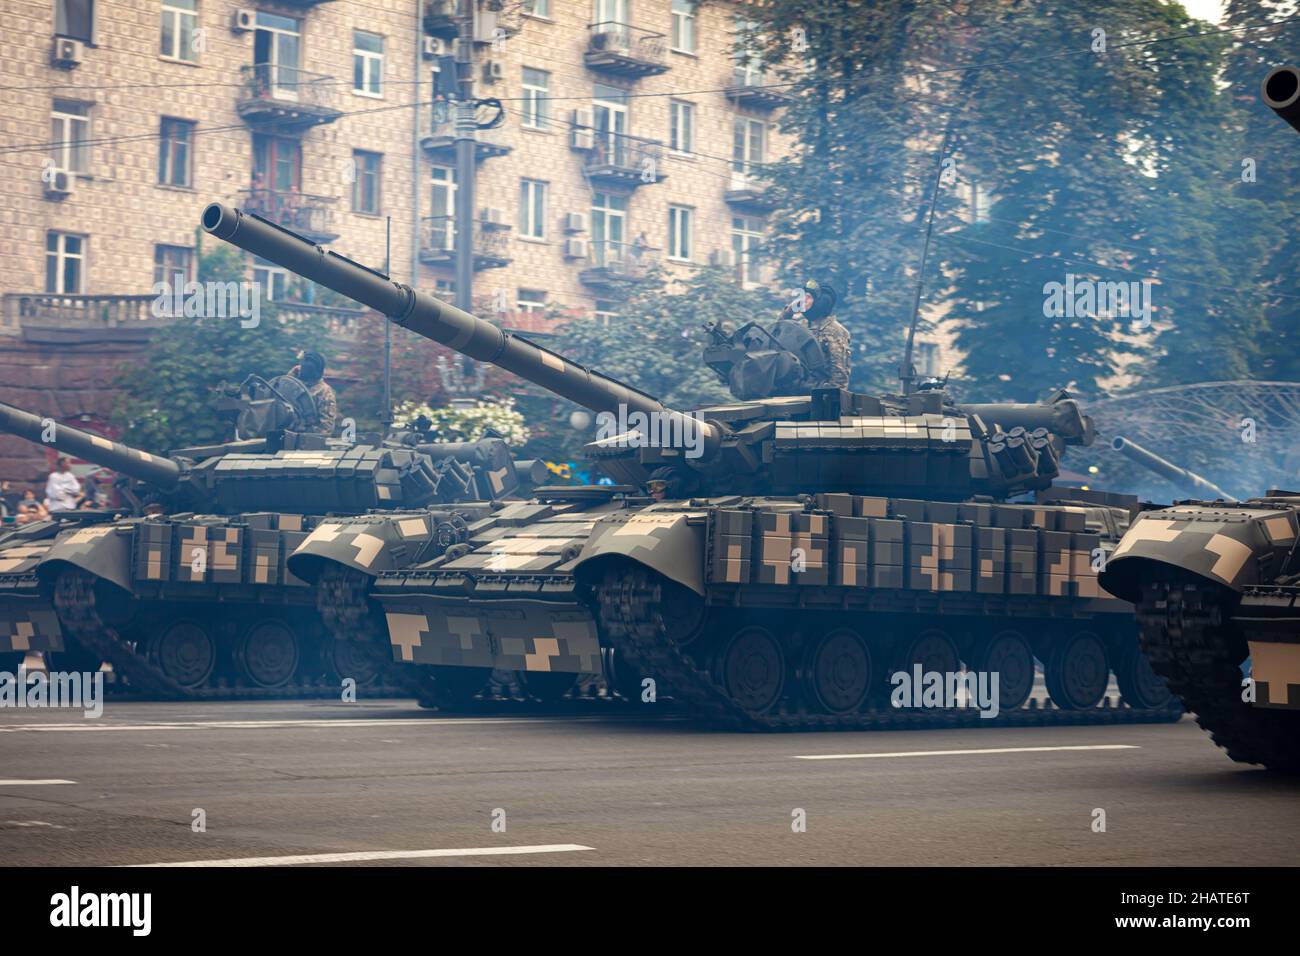 Ukraine, Kyiv - August 18, 2021: Tankman. Military parade. Armored vehicle. Transport in protective colors. Army vehicles SUVs Stock Photo